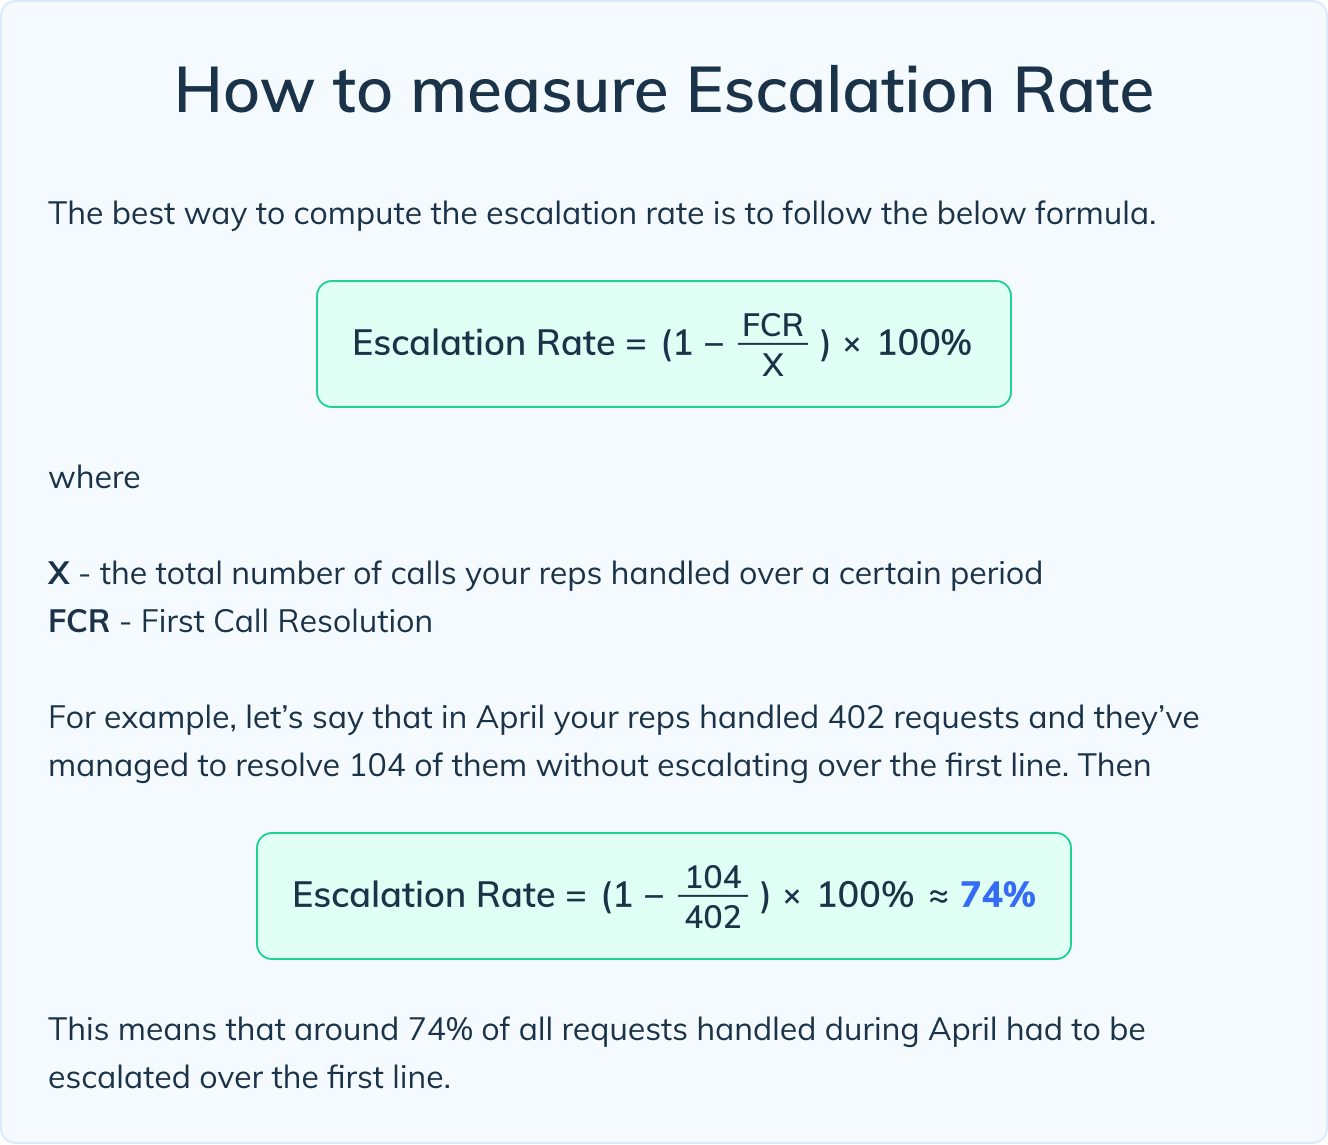 How to measure Escalation Rate